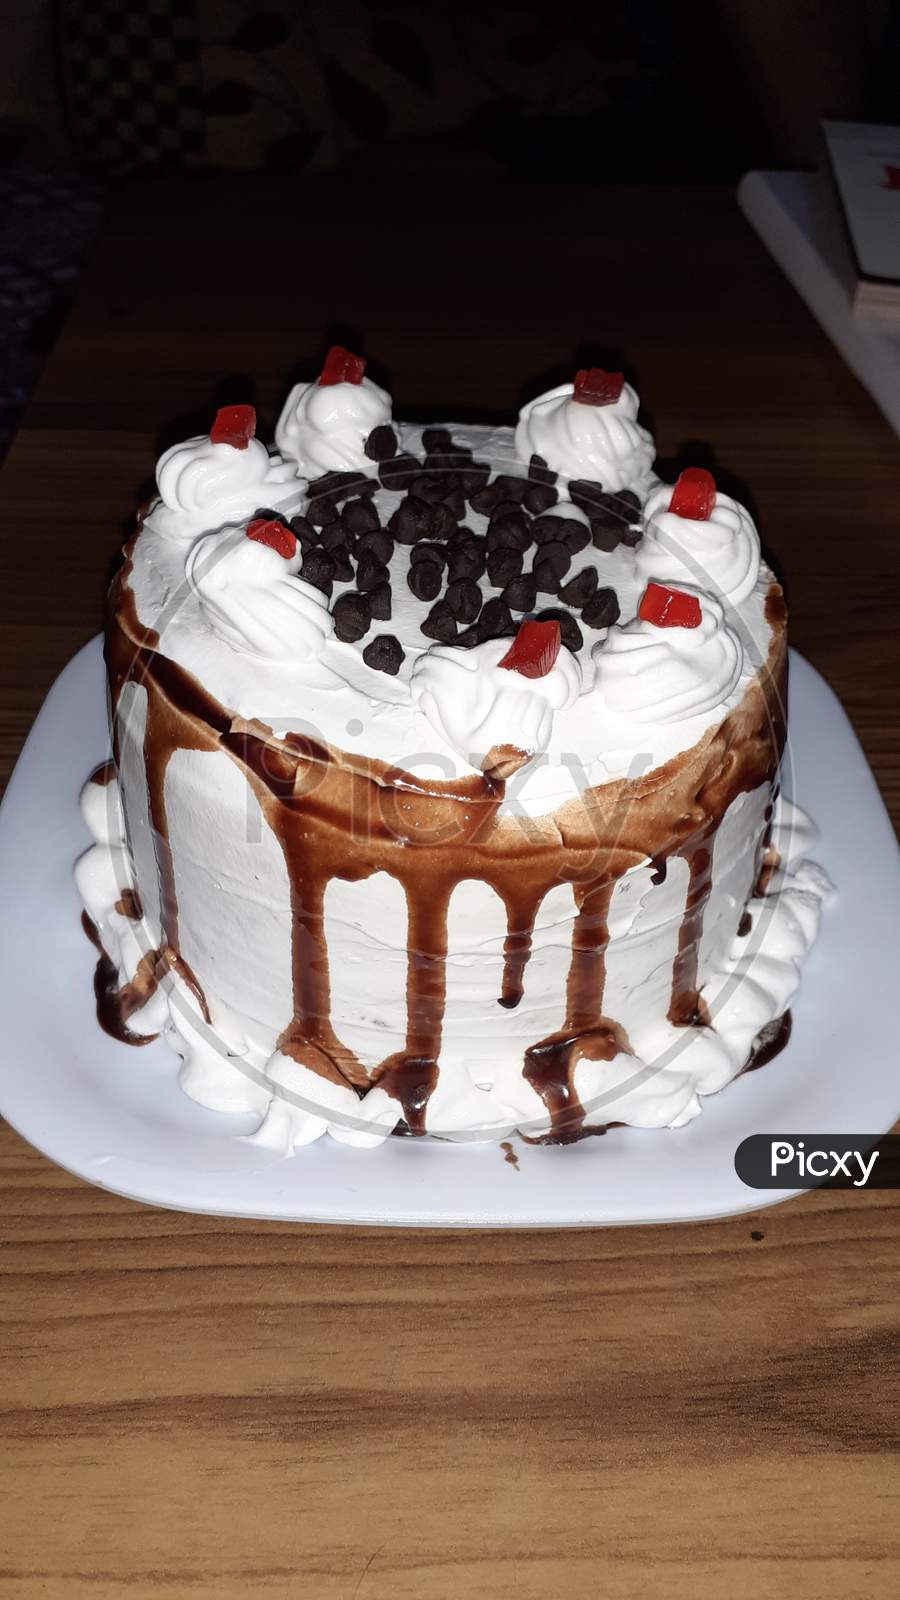 Image of home made ice cake with cherry on top-NM107199-Picxy